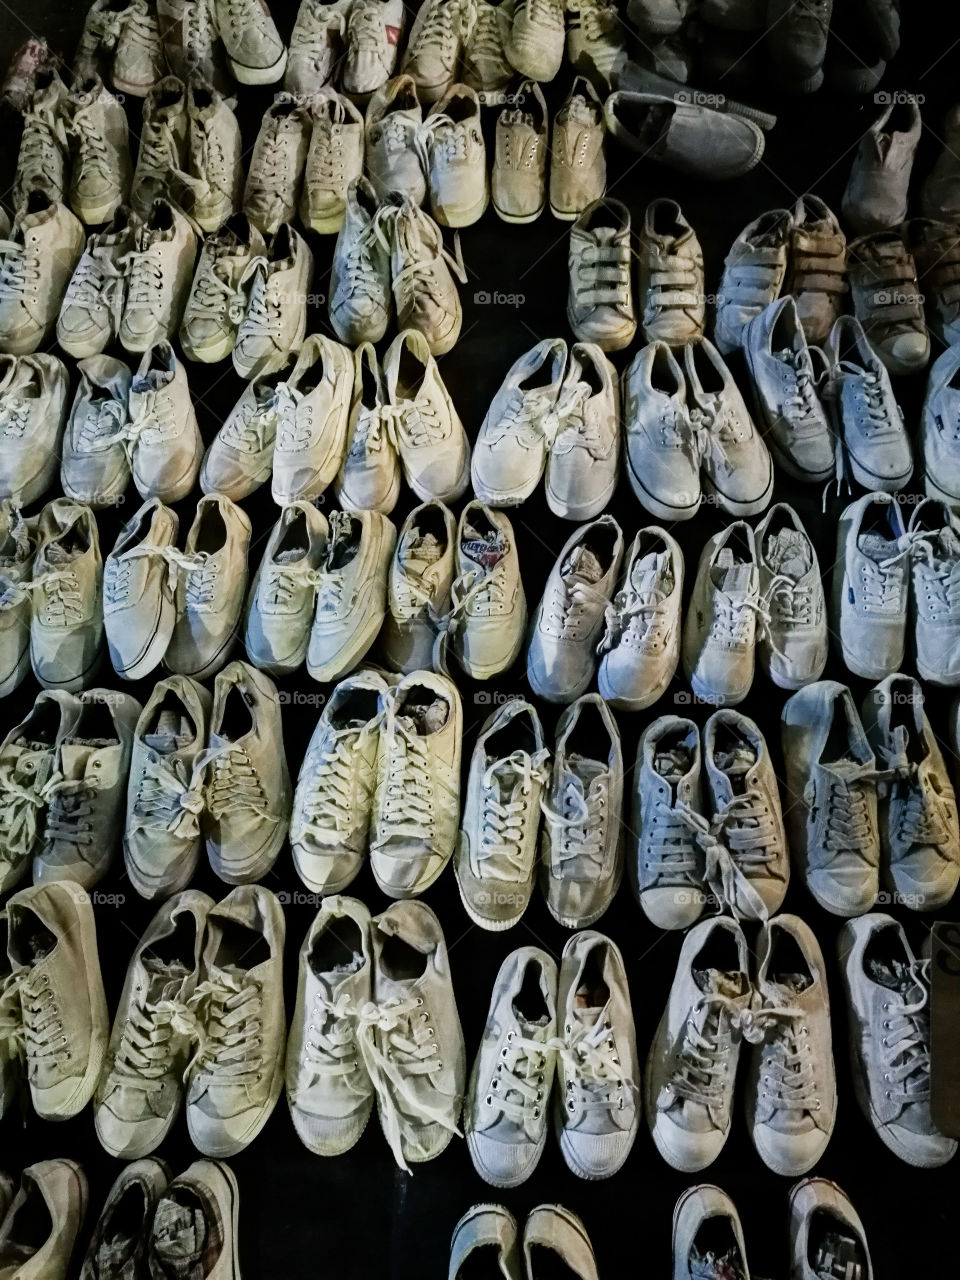 Shoes on display